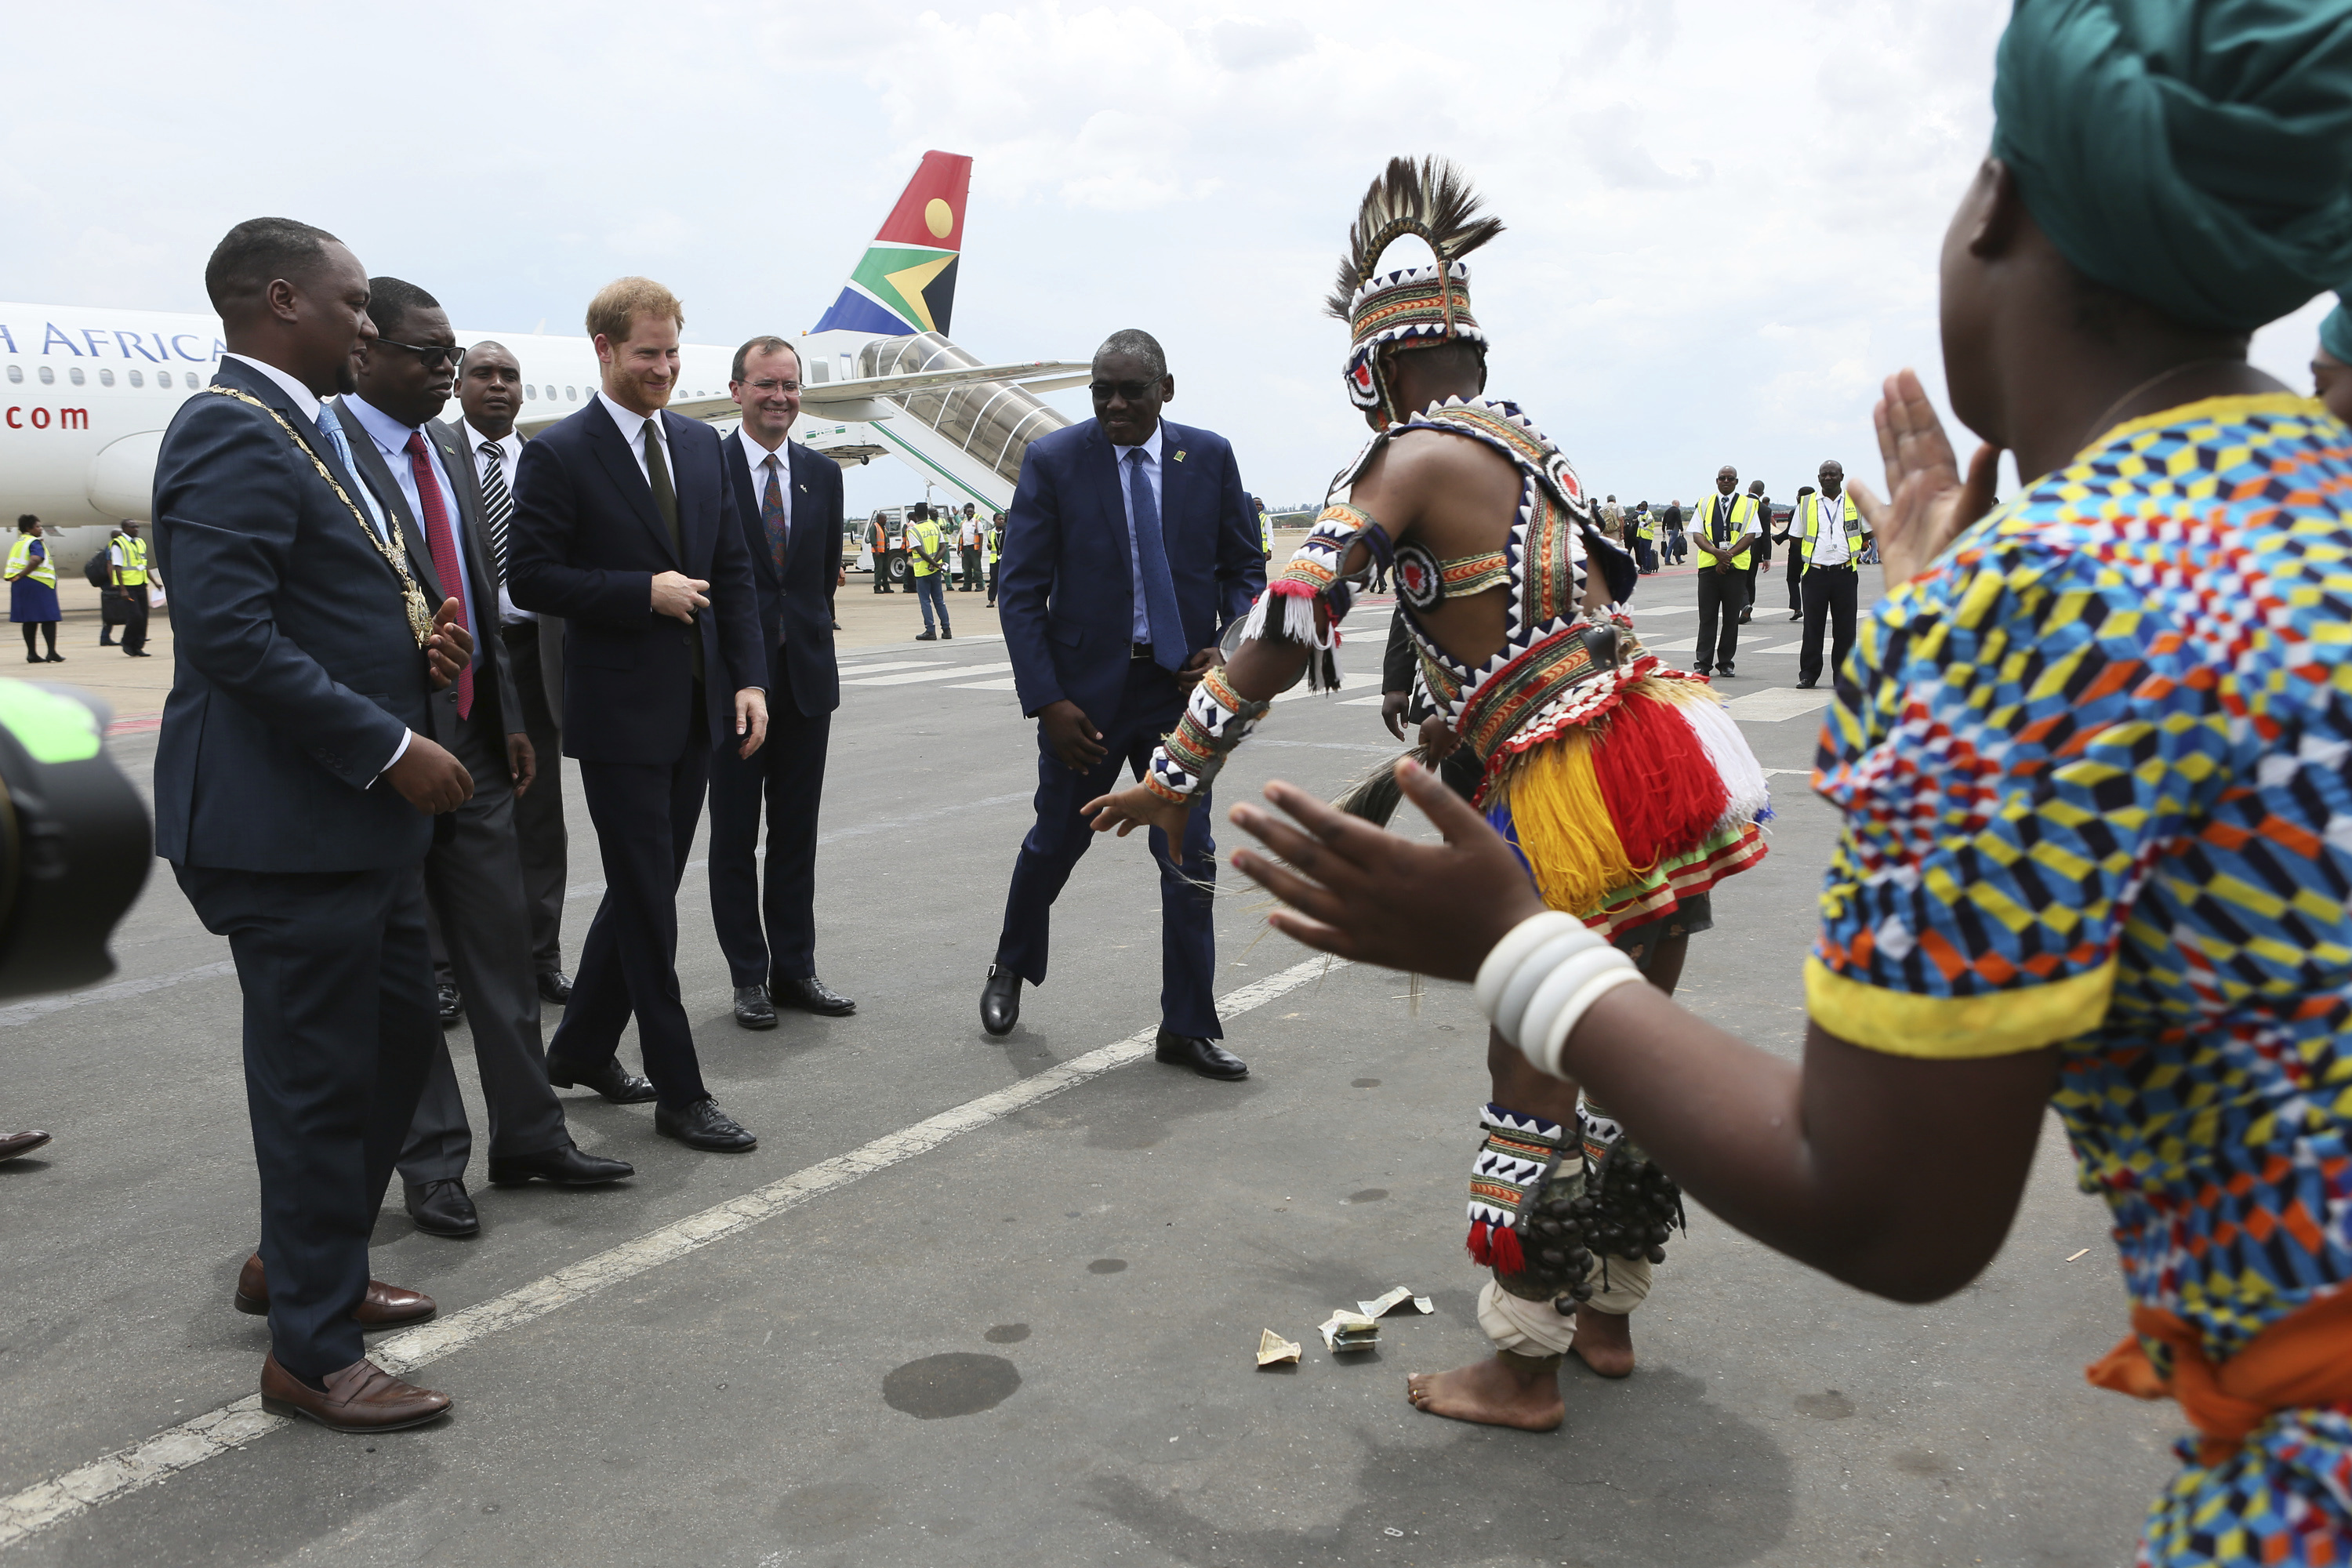 Zambian traditional dancers perform for the Duke of Sussex upon his arrival at Kenneth Kaunda airport in Lusaka